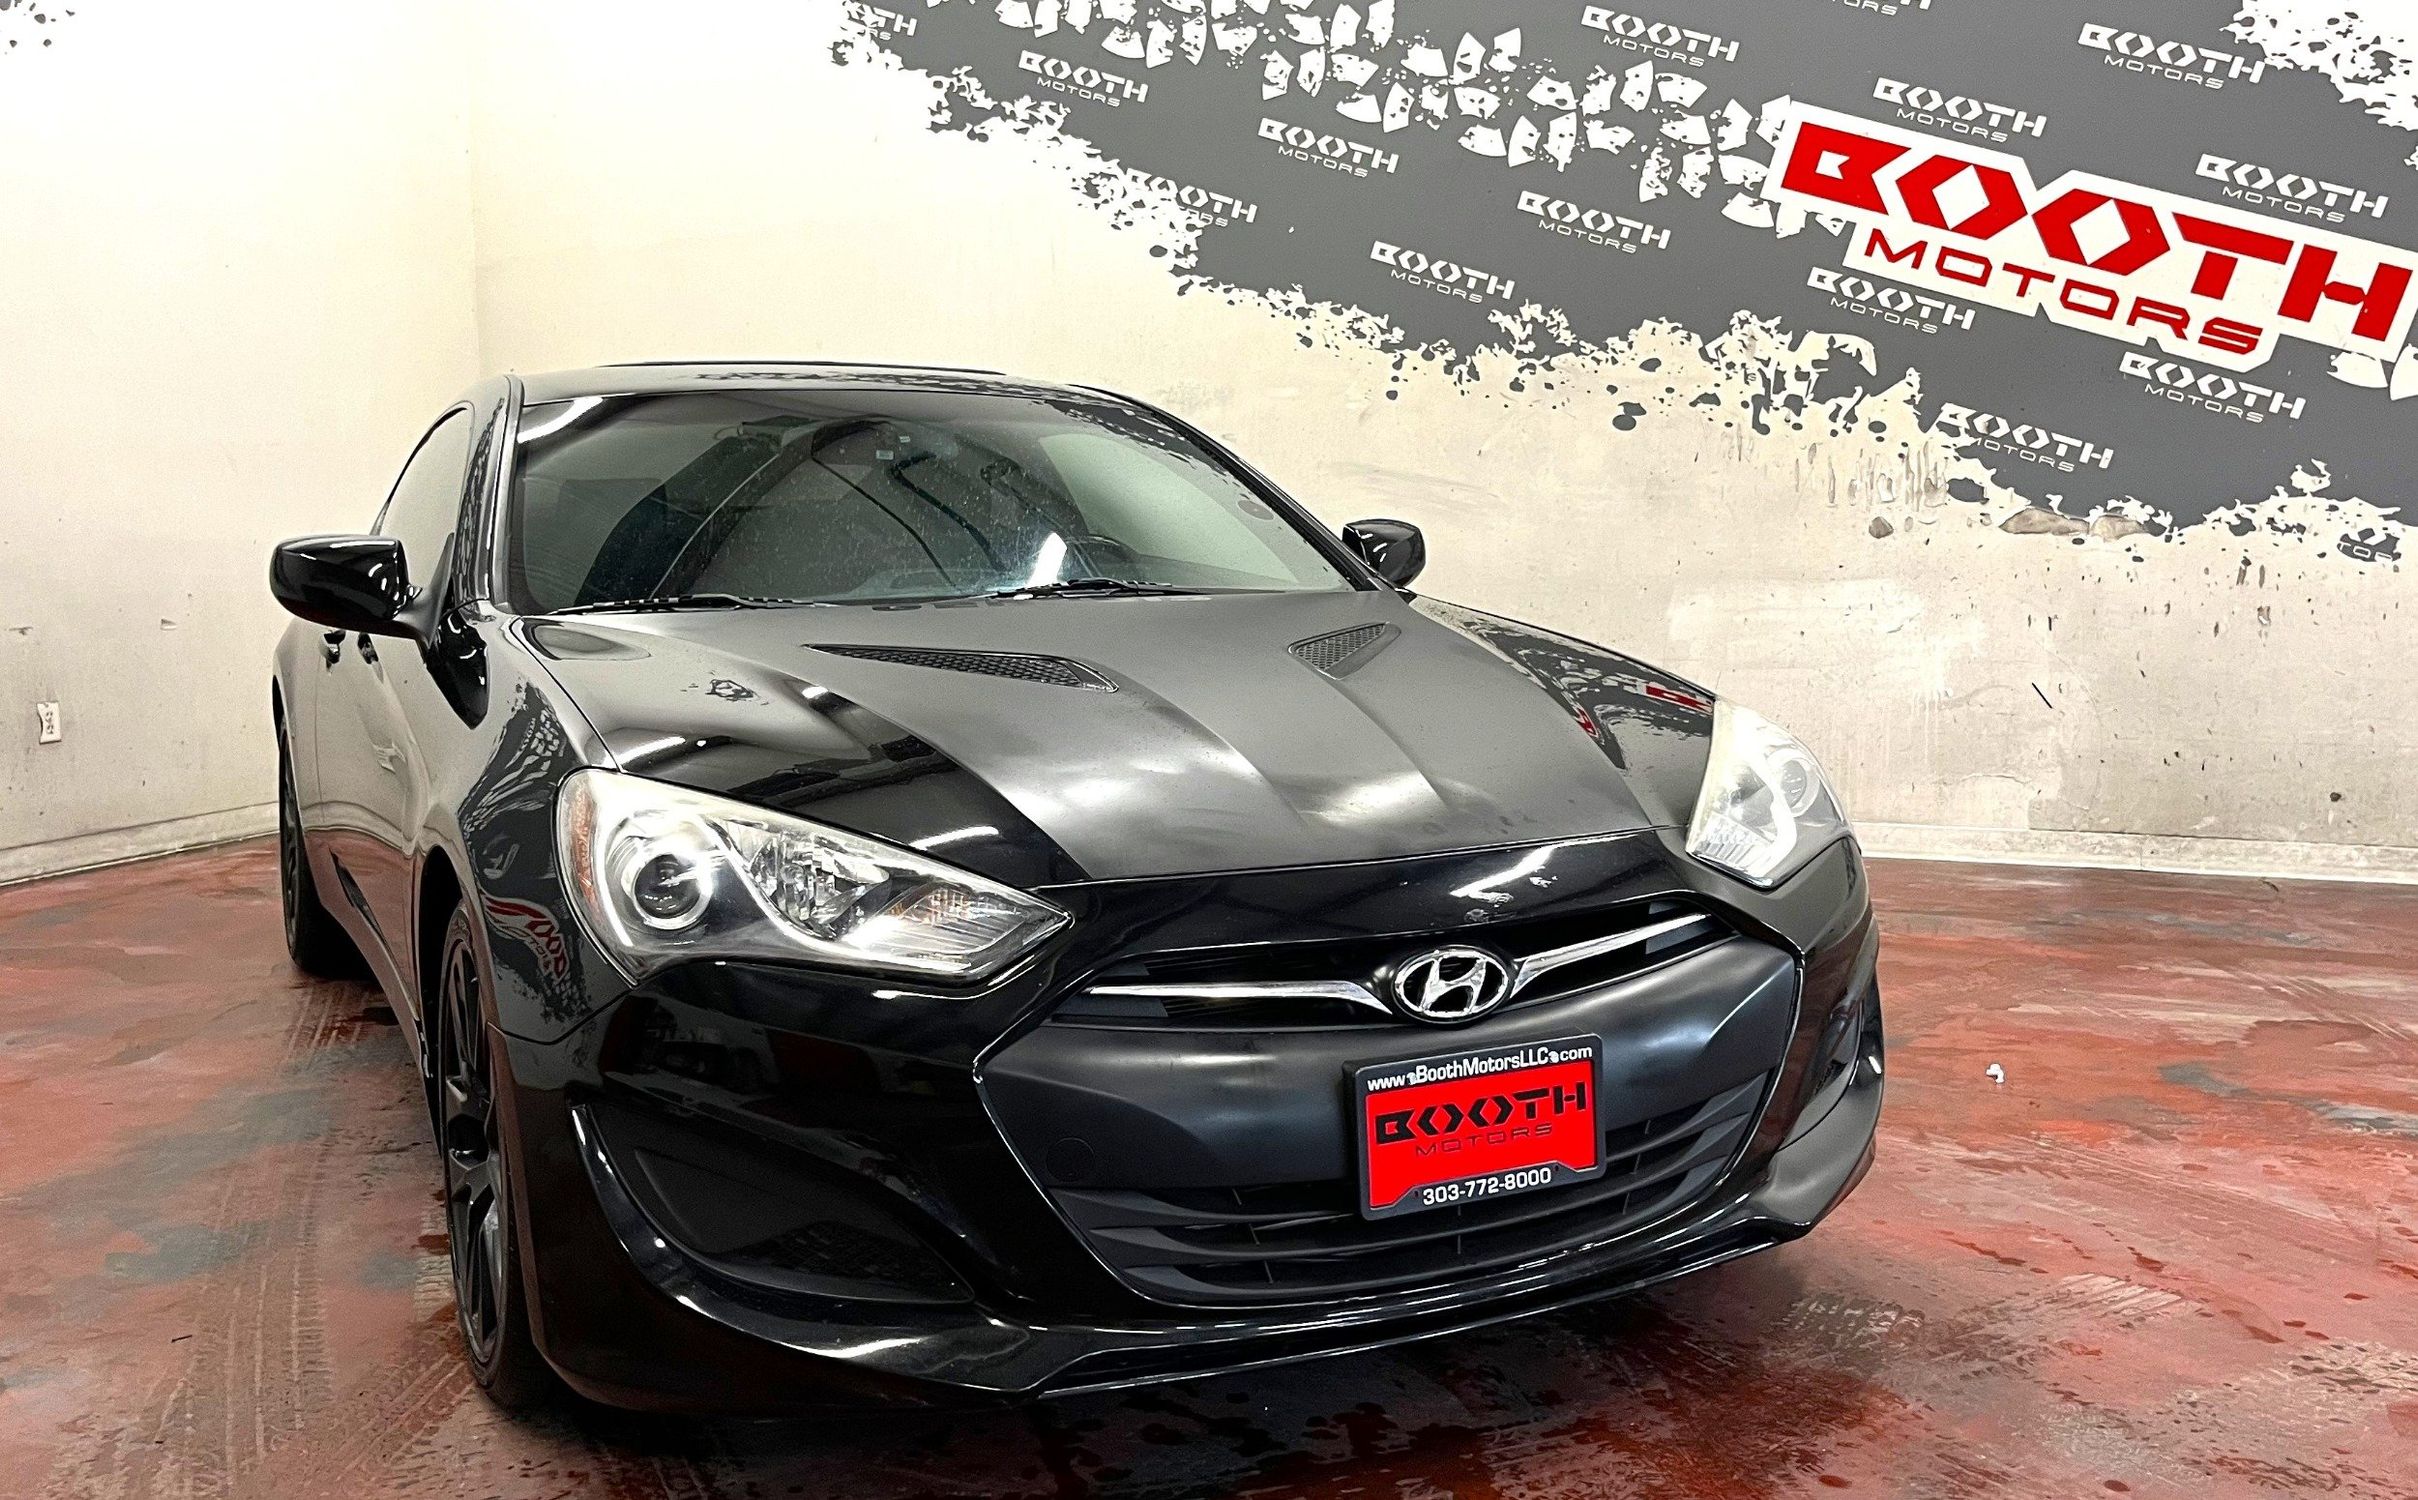 Used 2013 Hyundai Genesis Coupe  with VIN KMHHT6KD2DU080294 for sale in Longmont, CO